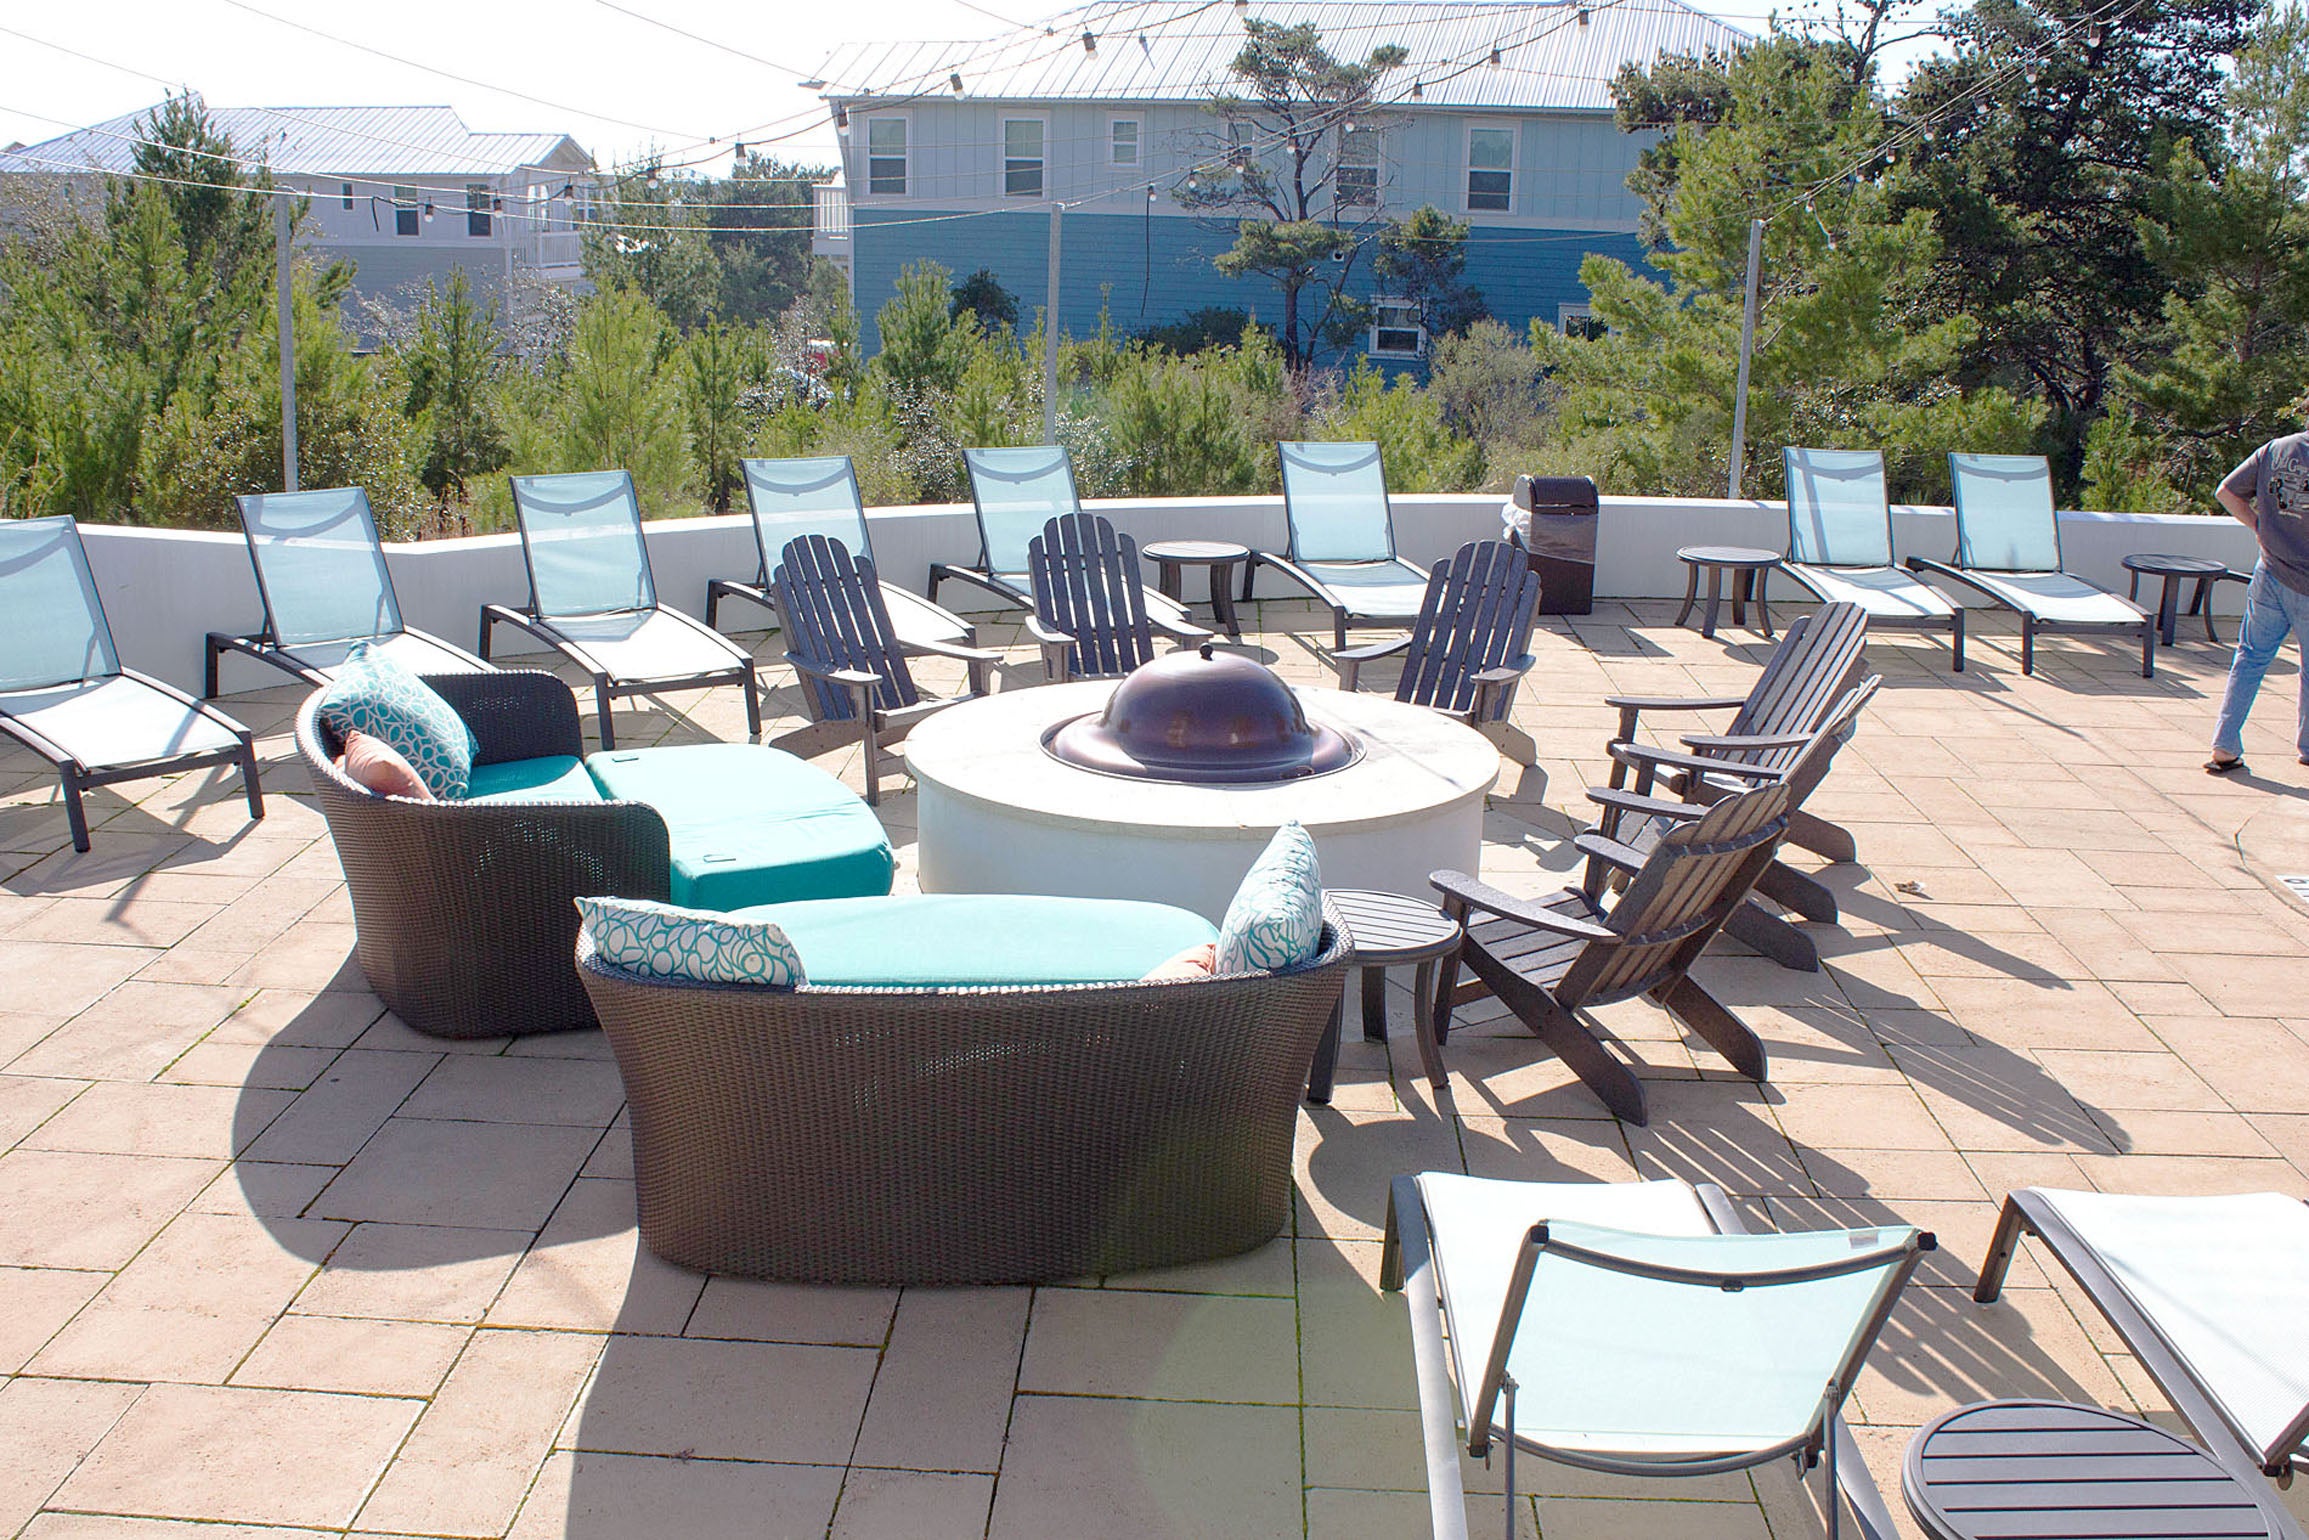 Relax by the fire pit at the Highland Parks pool